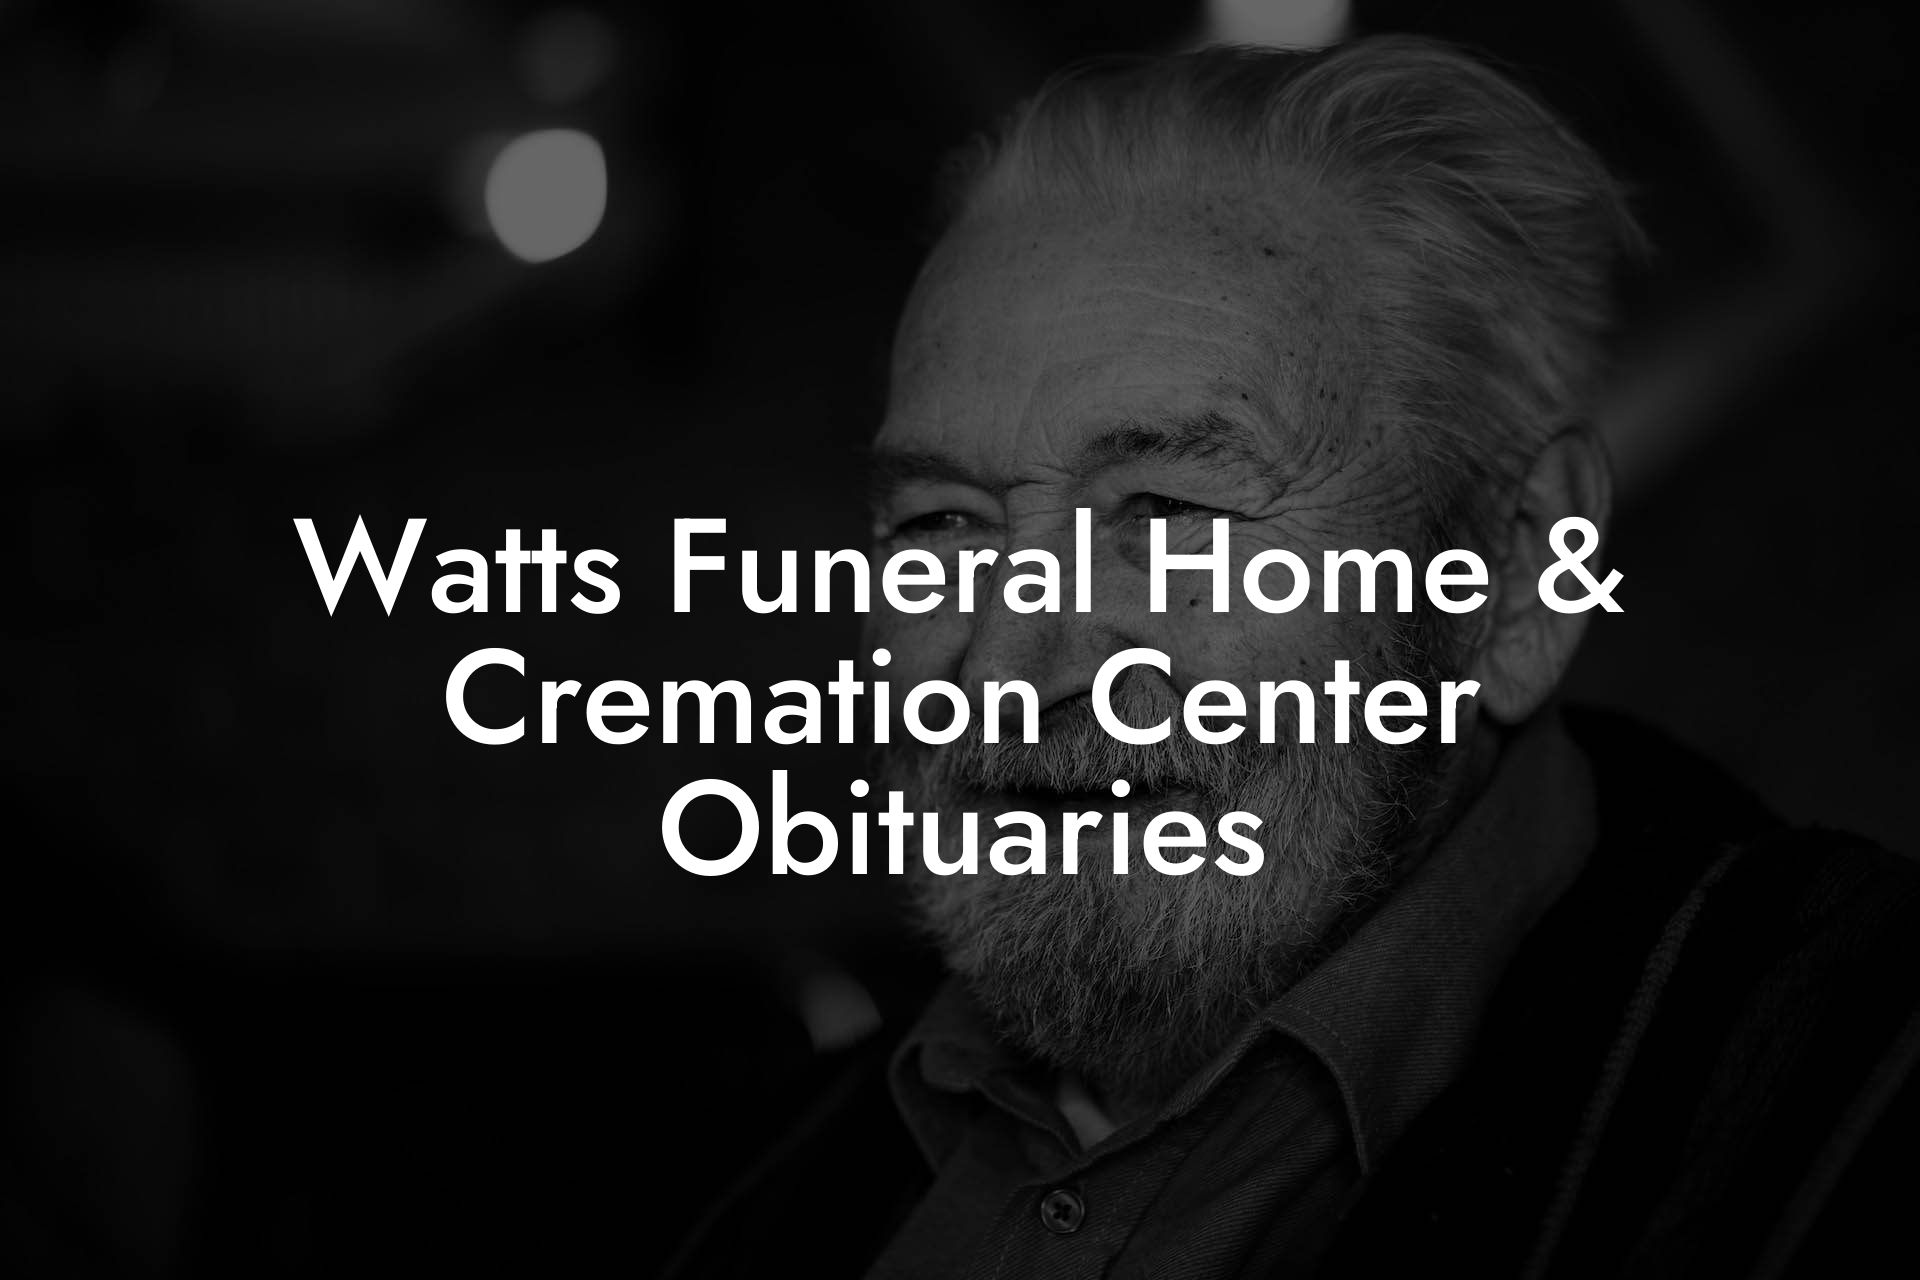 Watts Funeral Home & Cremation Center Obituaries